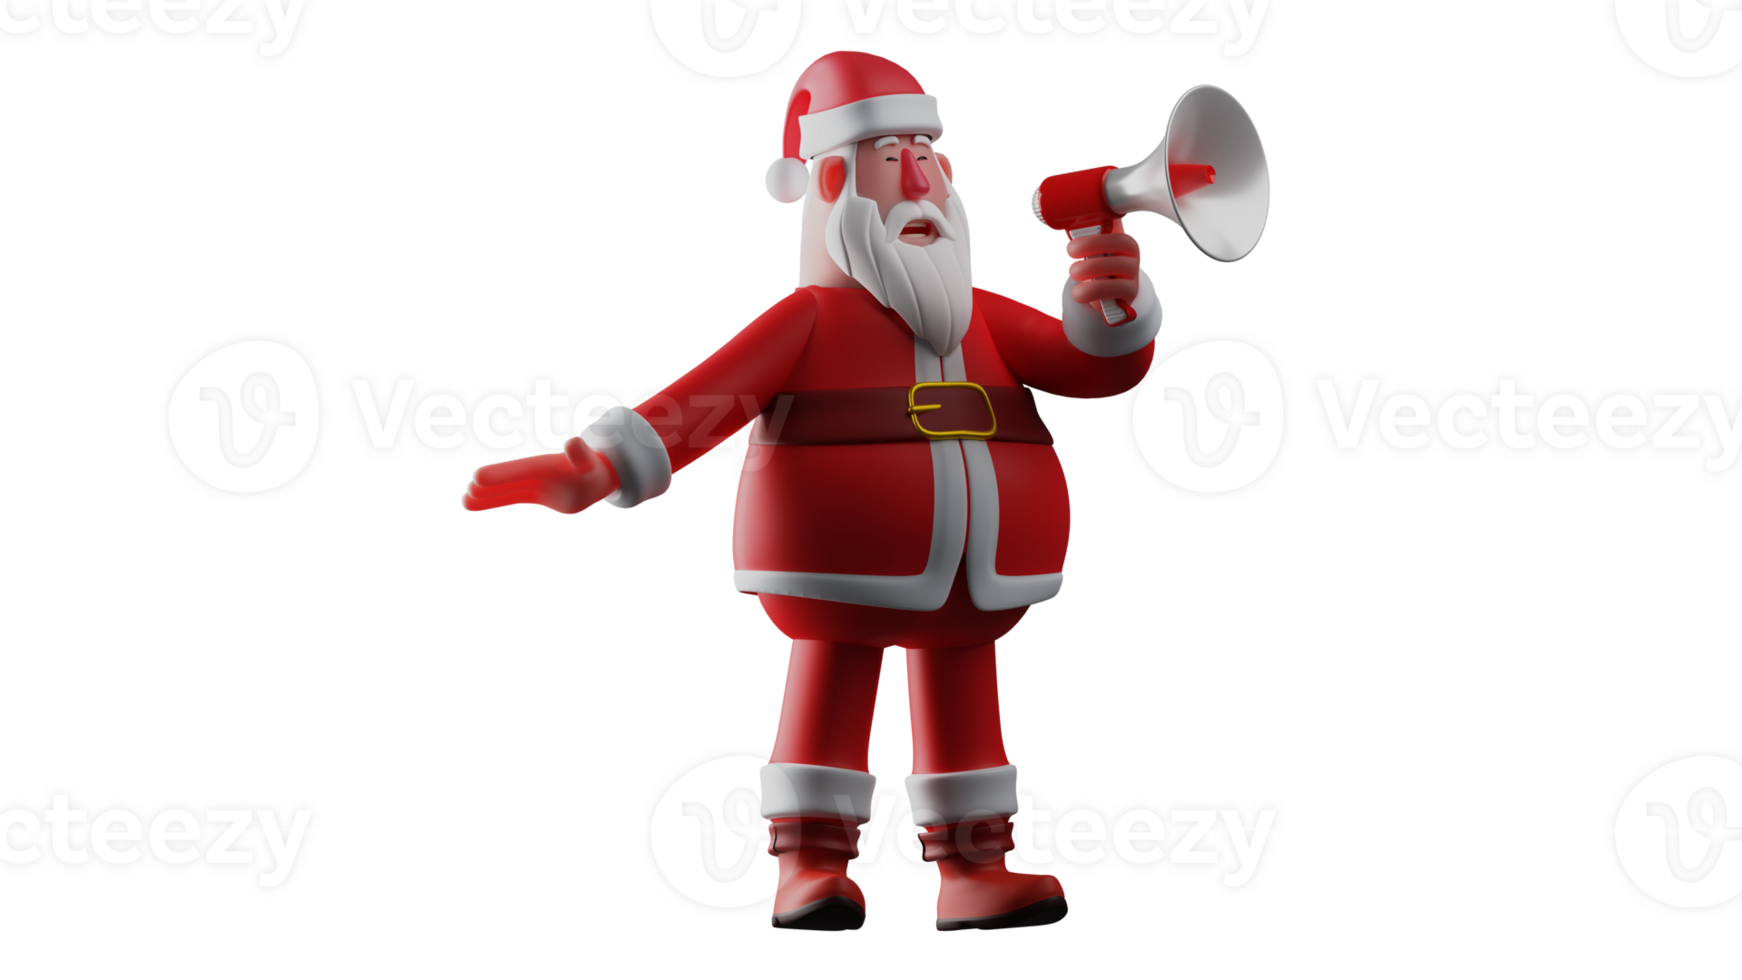 3D illustration. Excited Santa 3D Cartoon Character. Santa Claus standing talking using a megaphone. Santa makes an announcement about Christmas celebrations tonight. 3D Cartoon Character png